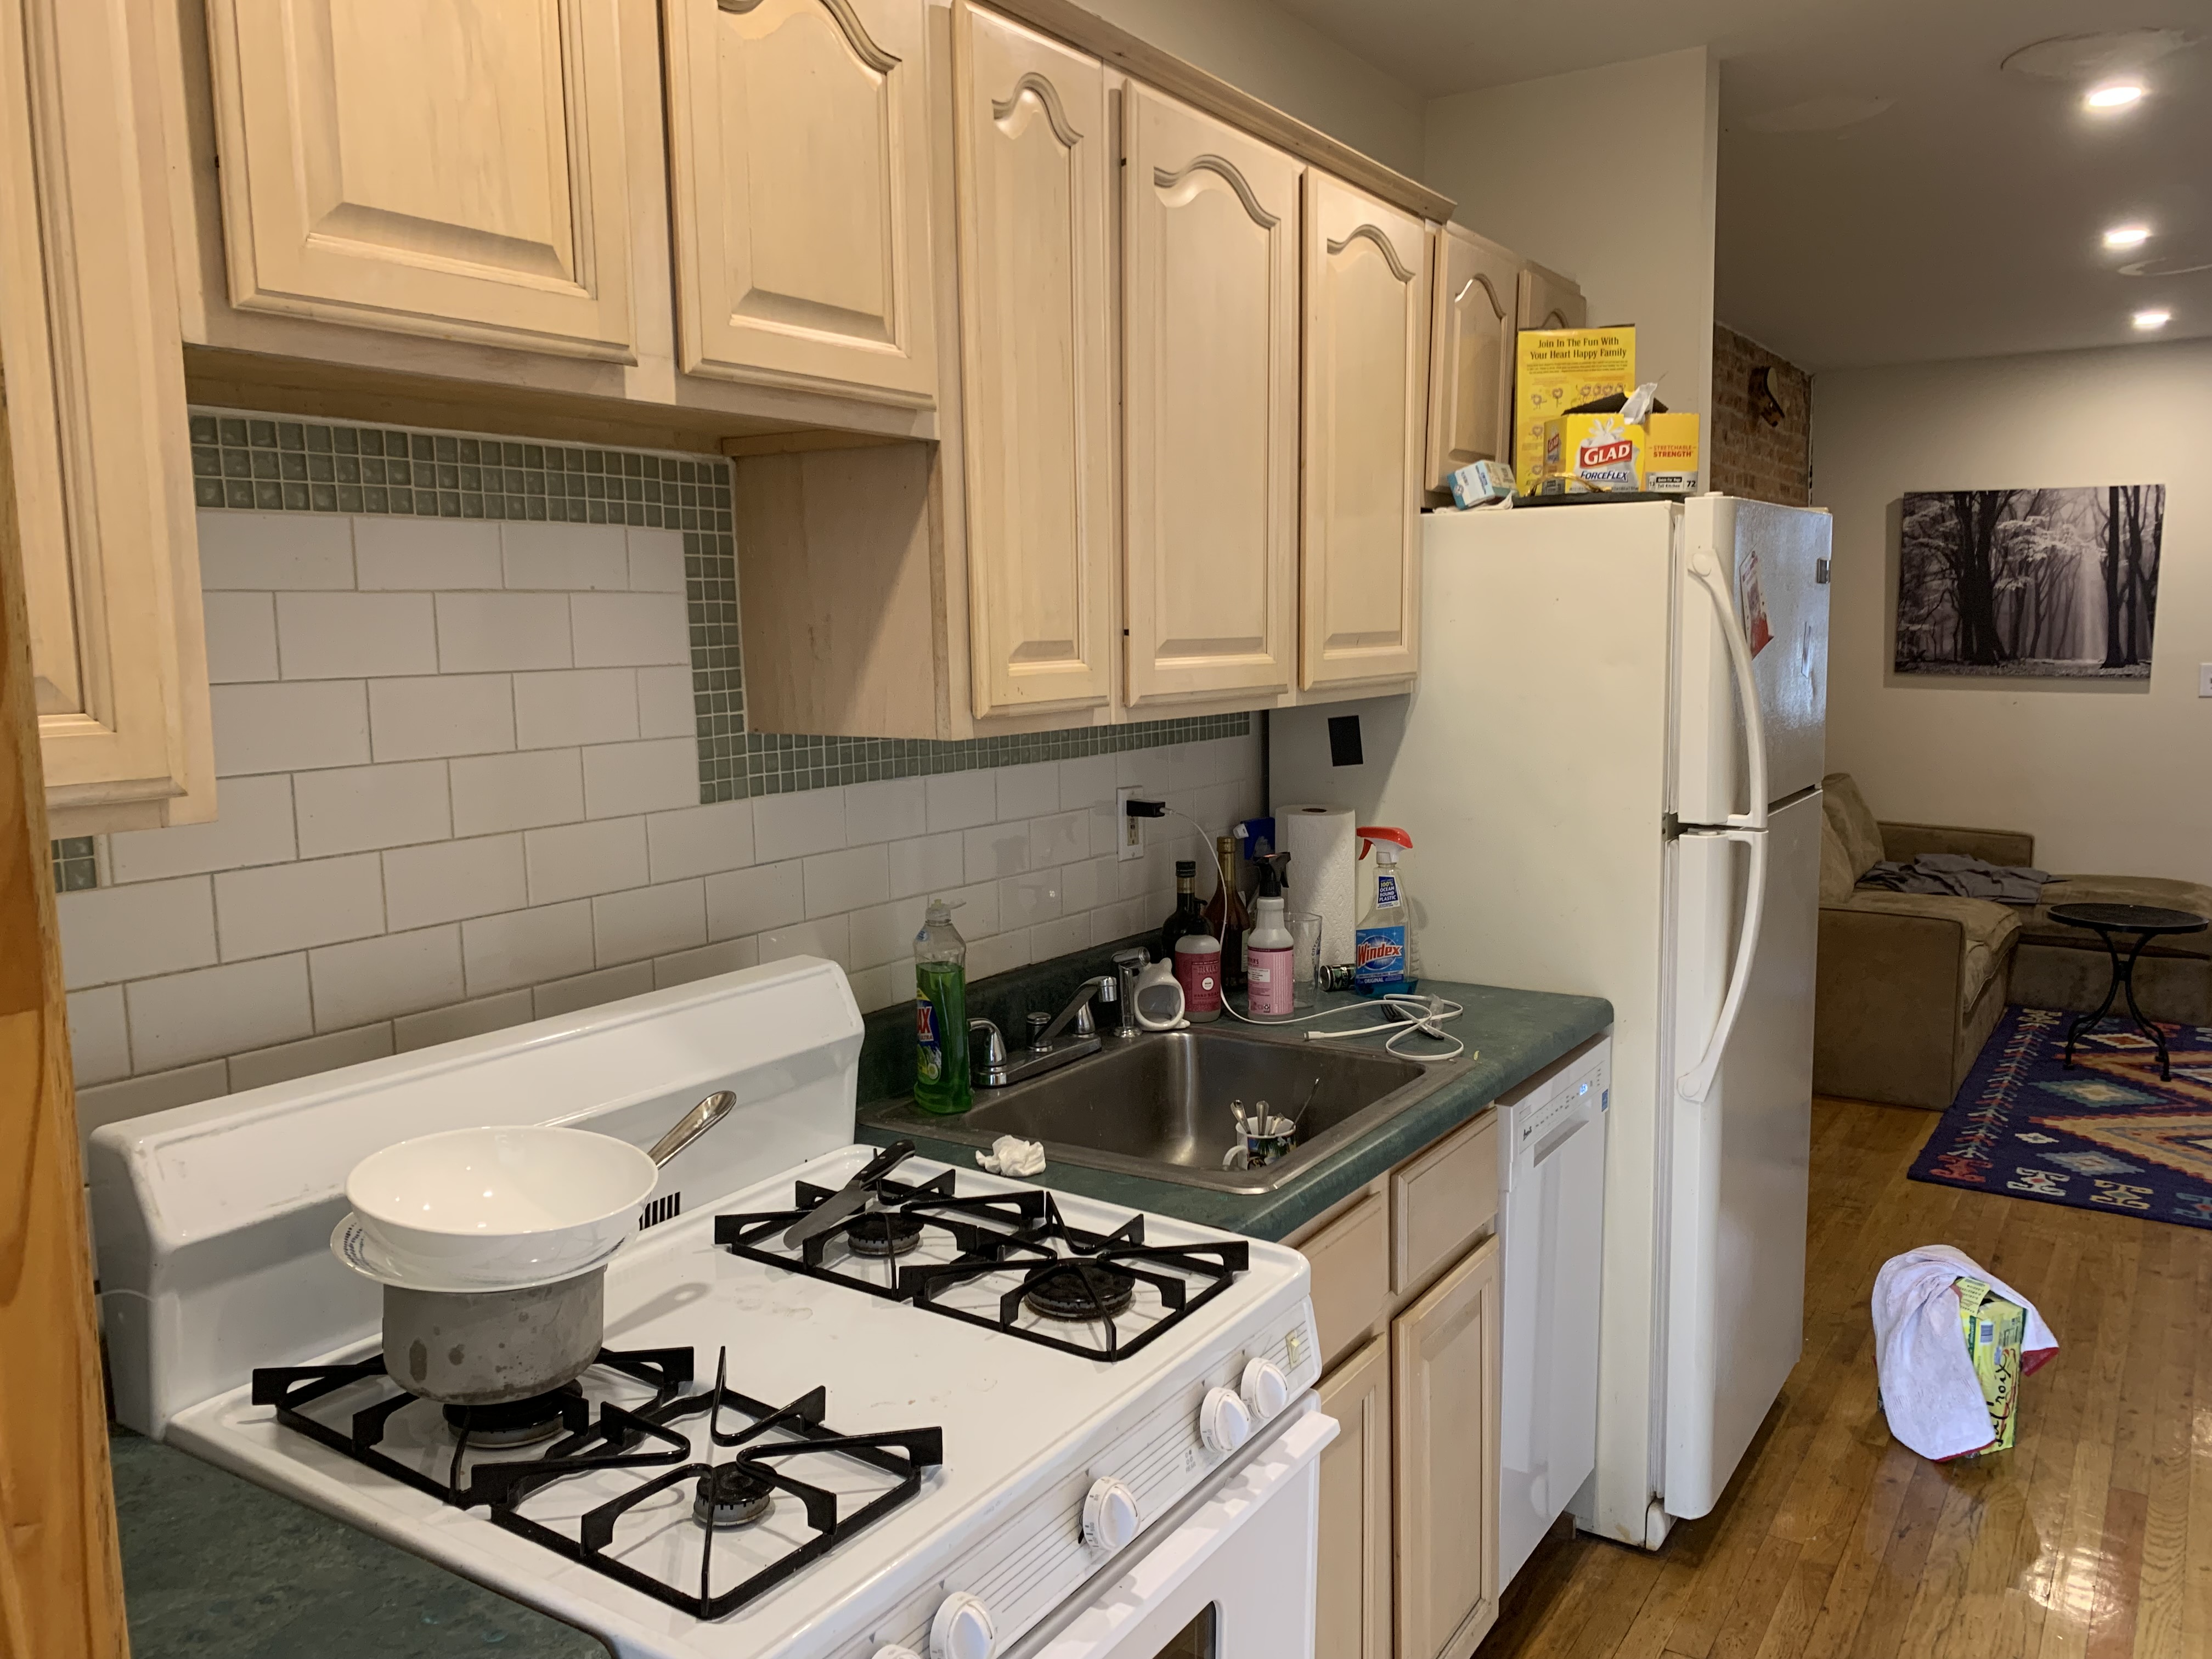 700 sackett St, Brooklyn, NY, 2 Bedrooms Bedrooms, 4 Rooms Rooms,1 BathroomBathrooms,Apartment,For Rent,sackett St,3,1246